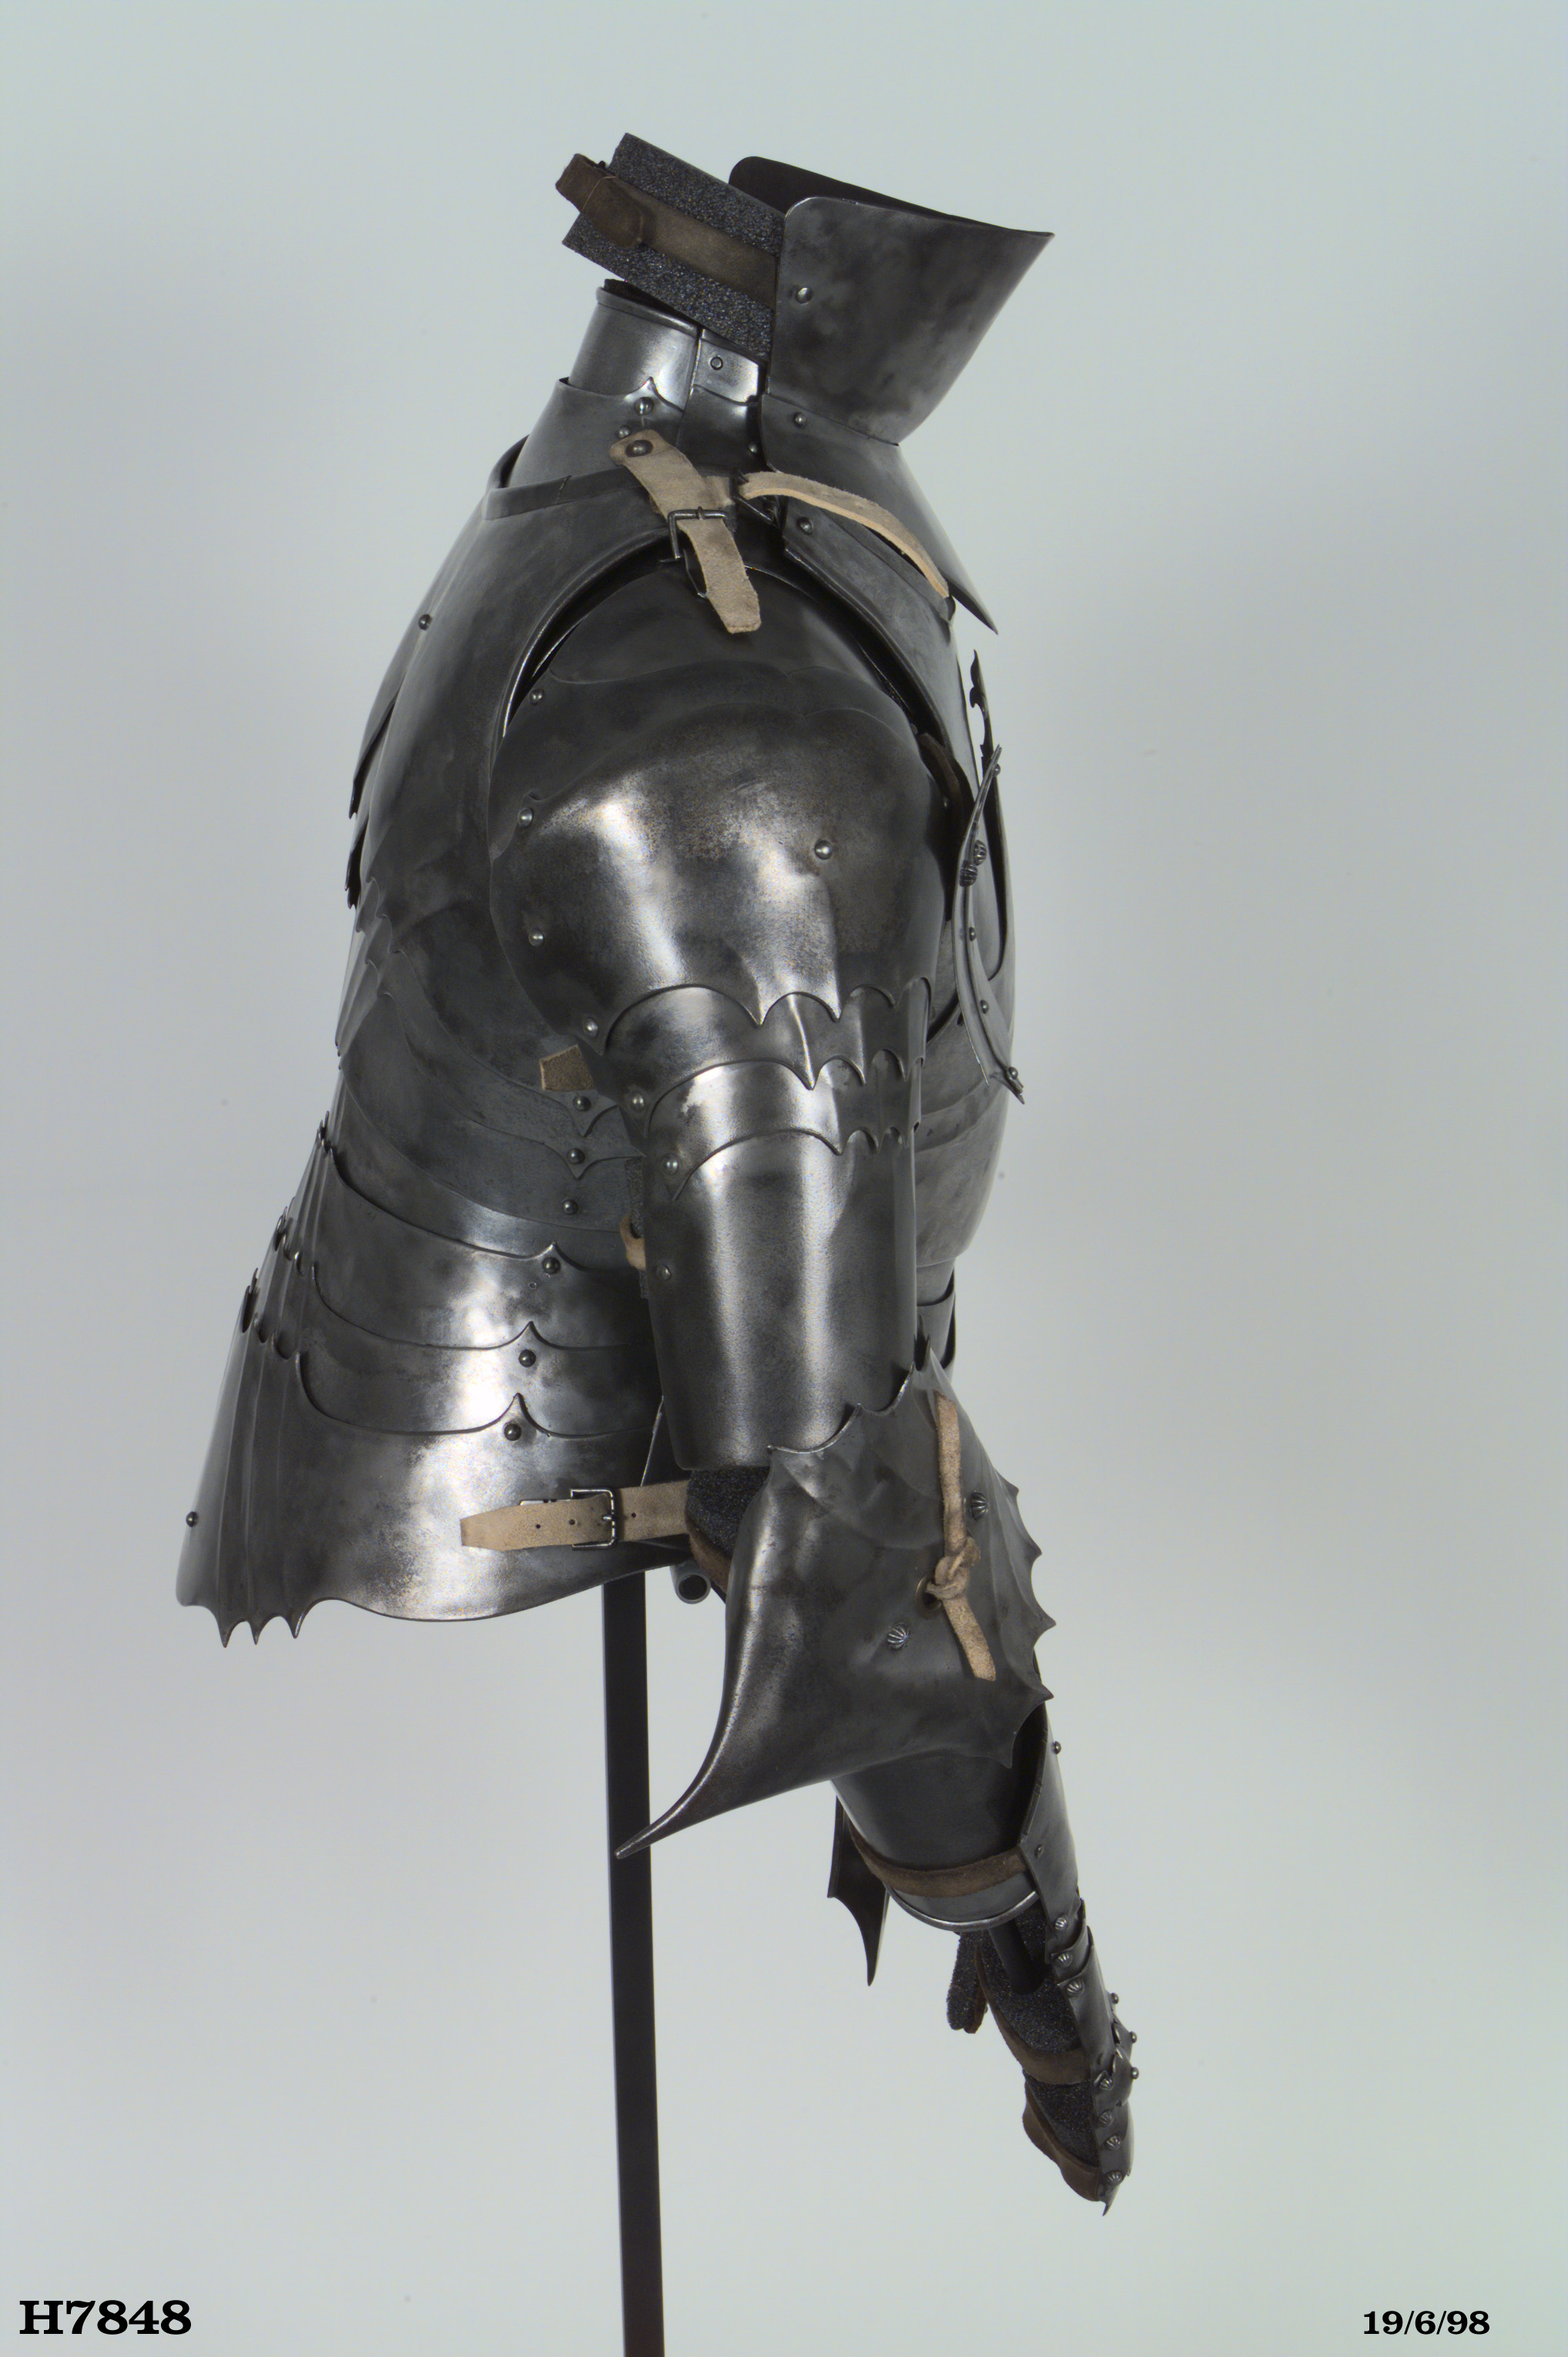 Reproduction half suit armour from 15th century suit of armour